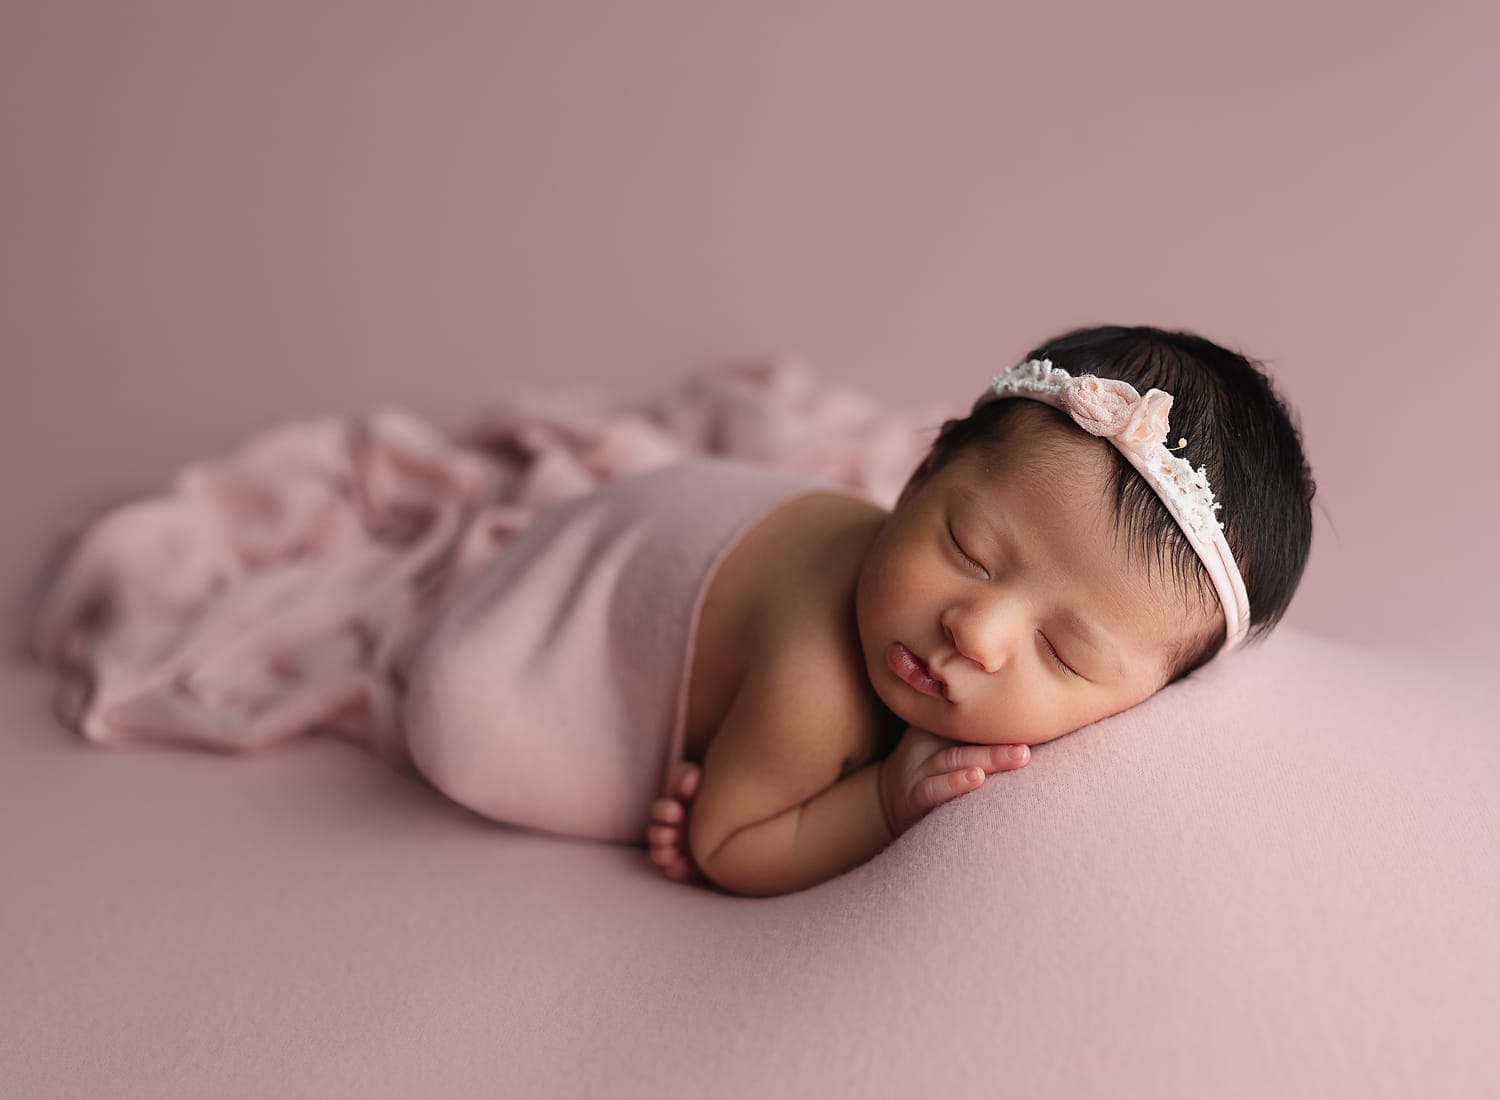 A newborn baby girl in the studio lying on a pick backdrop with a pink floral headband with feet curled up.